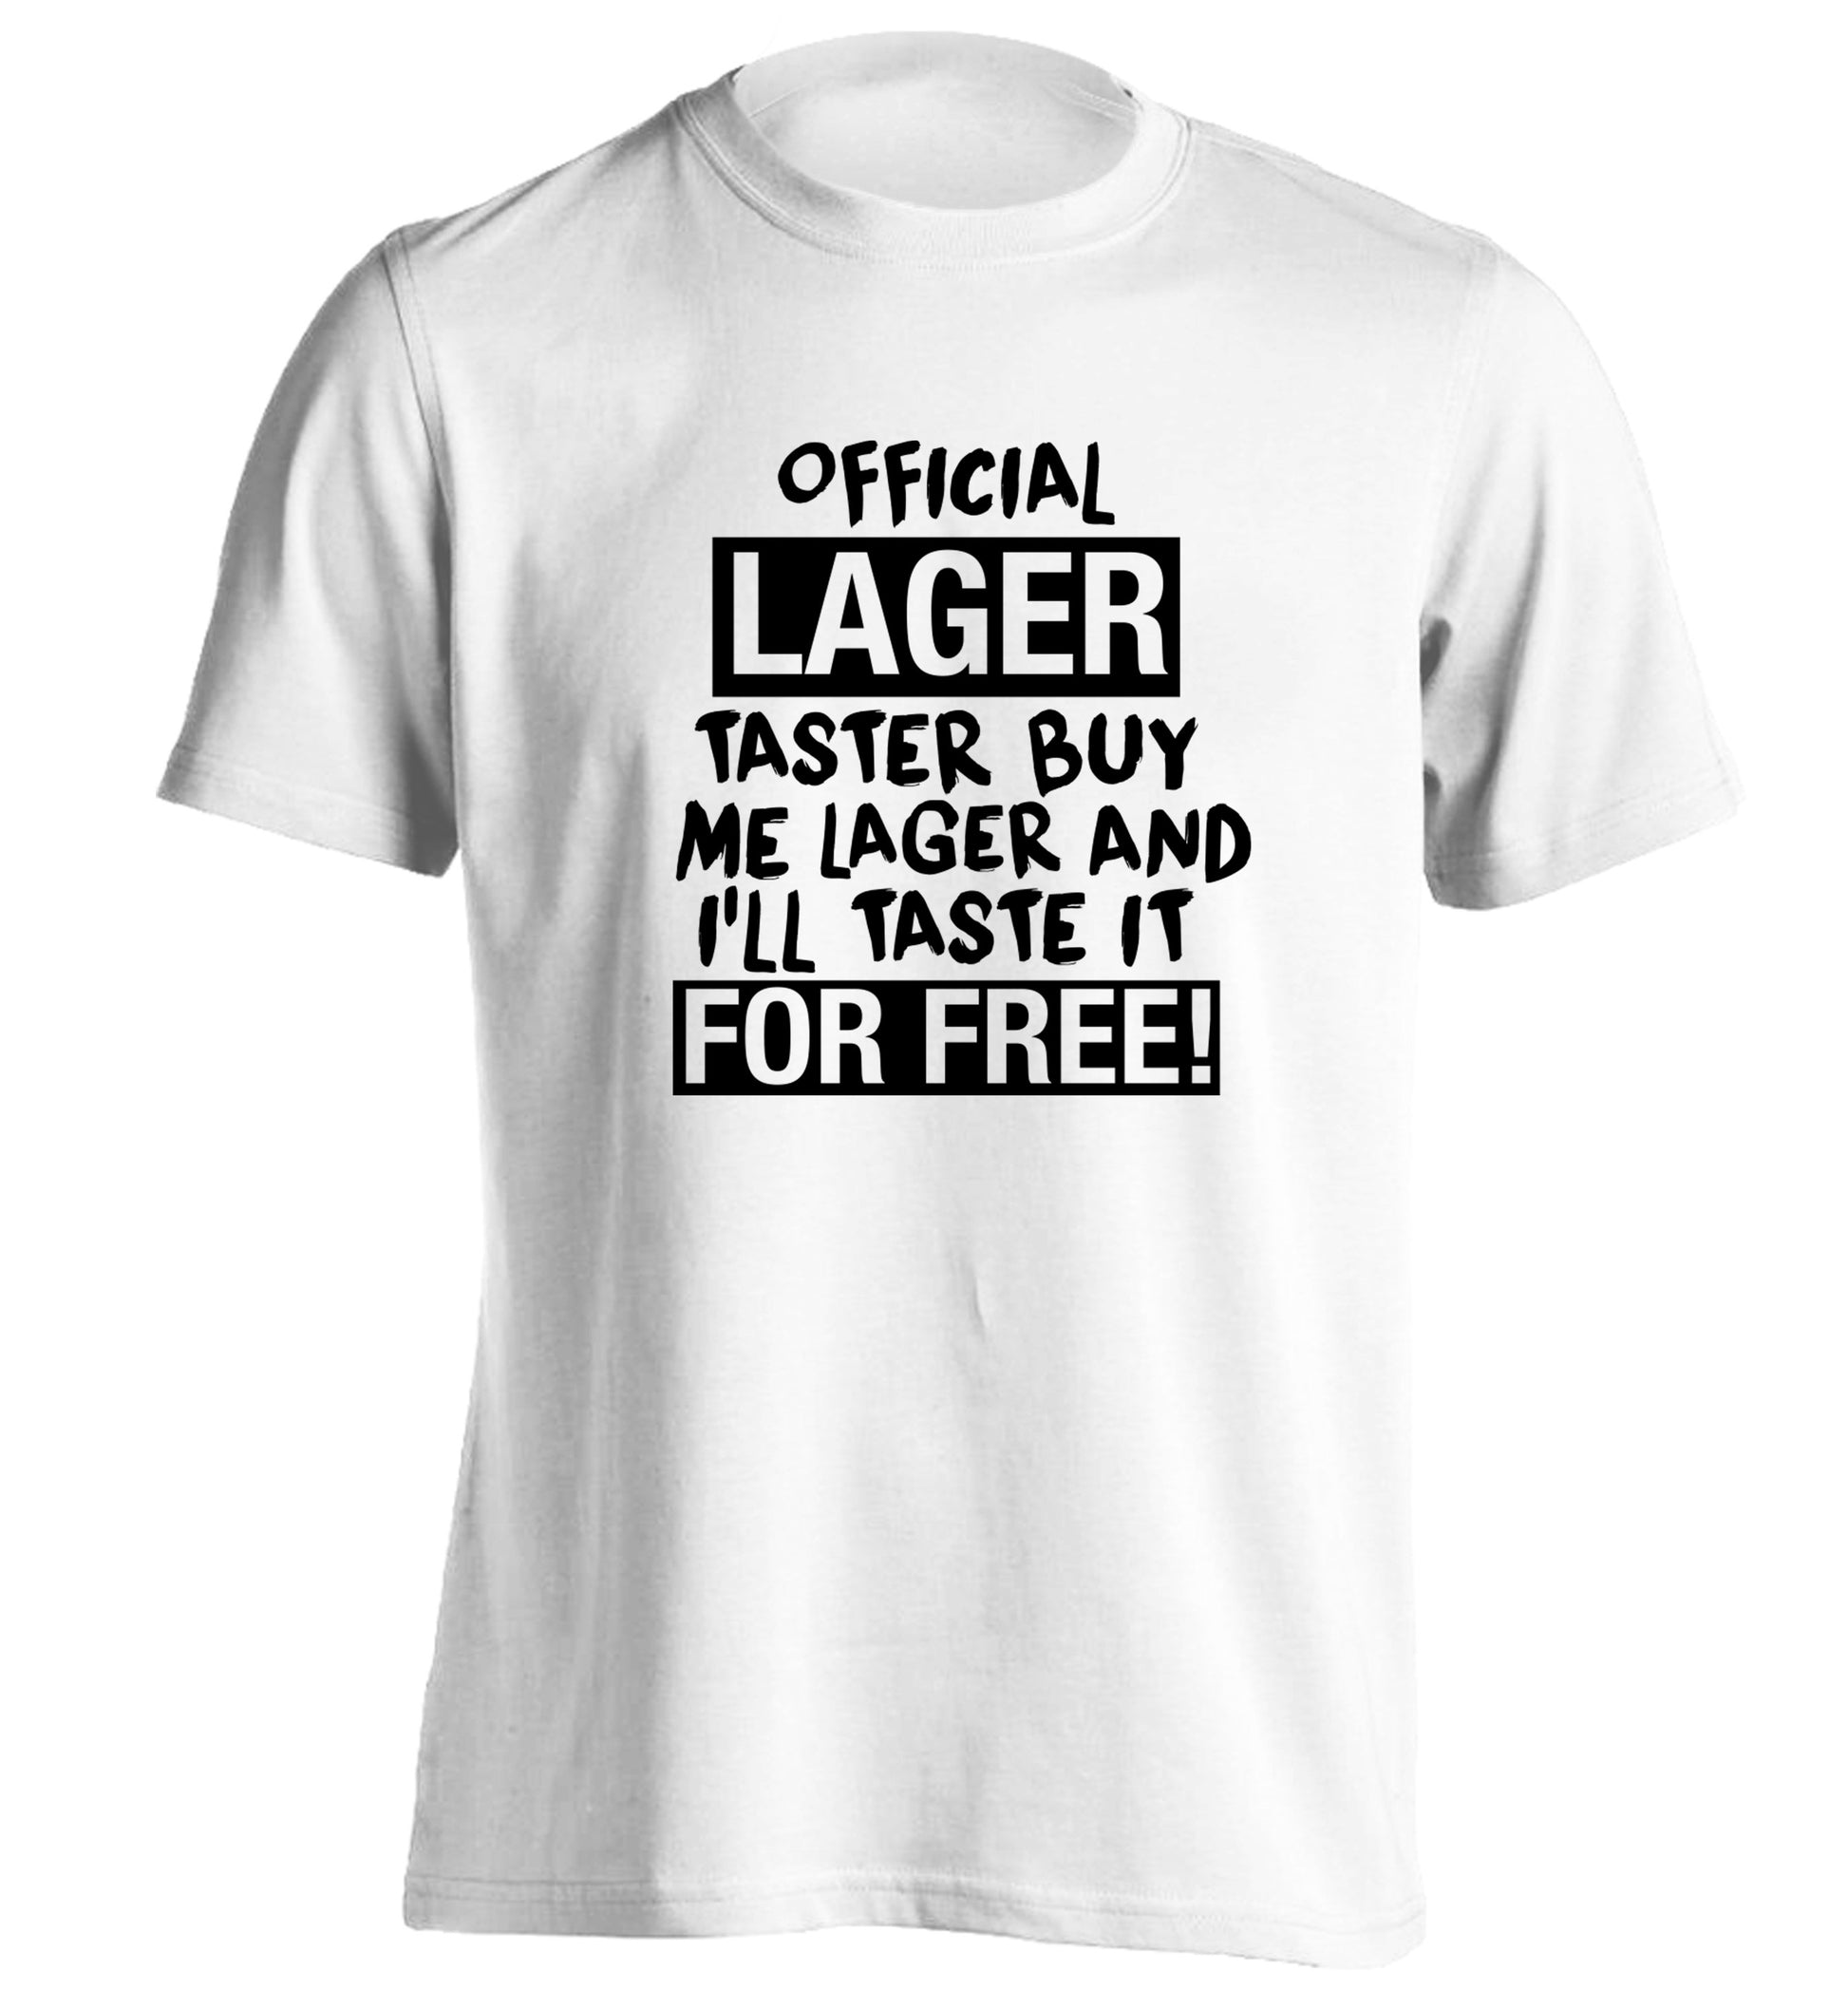 Official lager taster buy me lager and I'll taste it for free! adults unisex white Tshirt 2XL